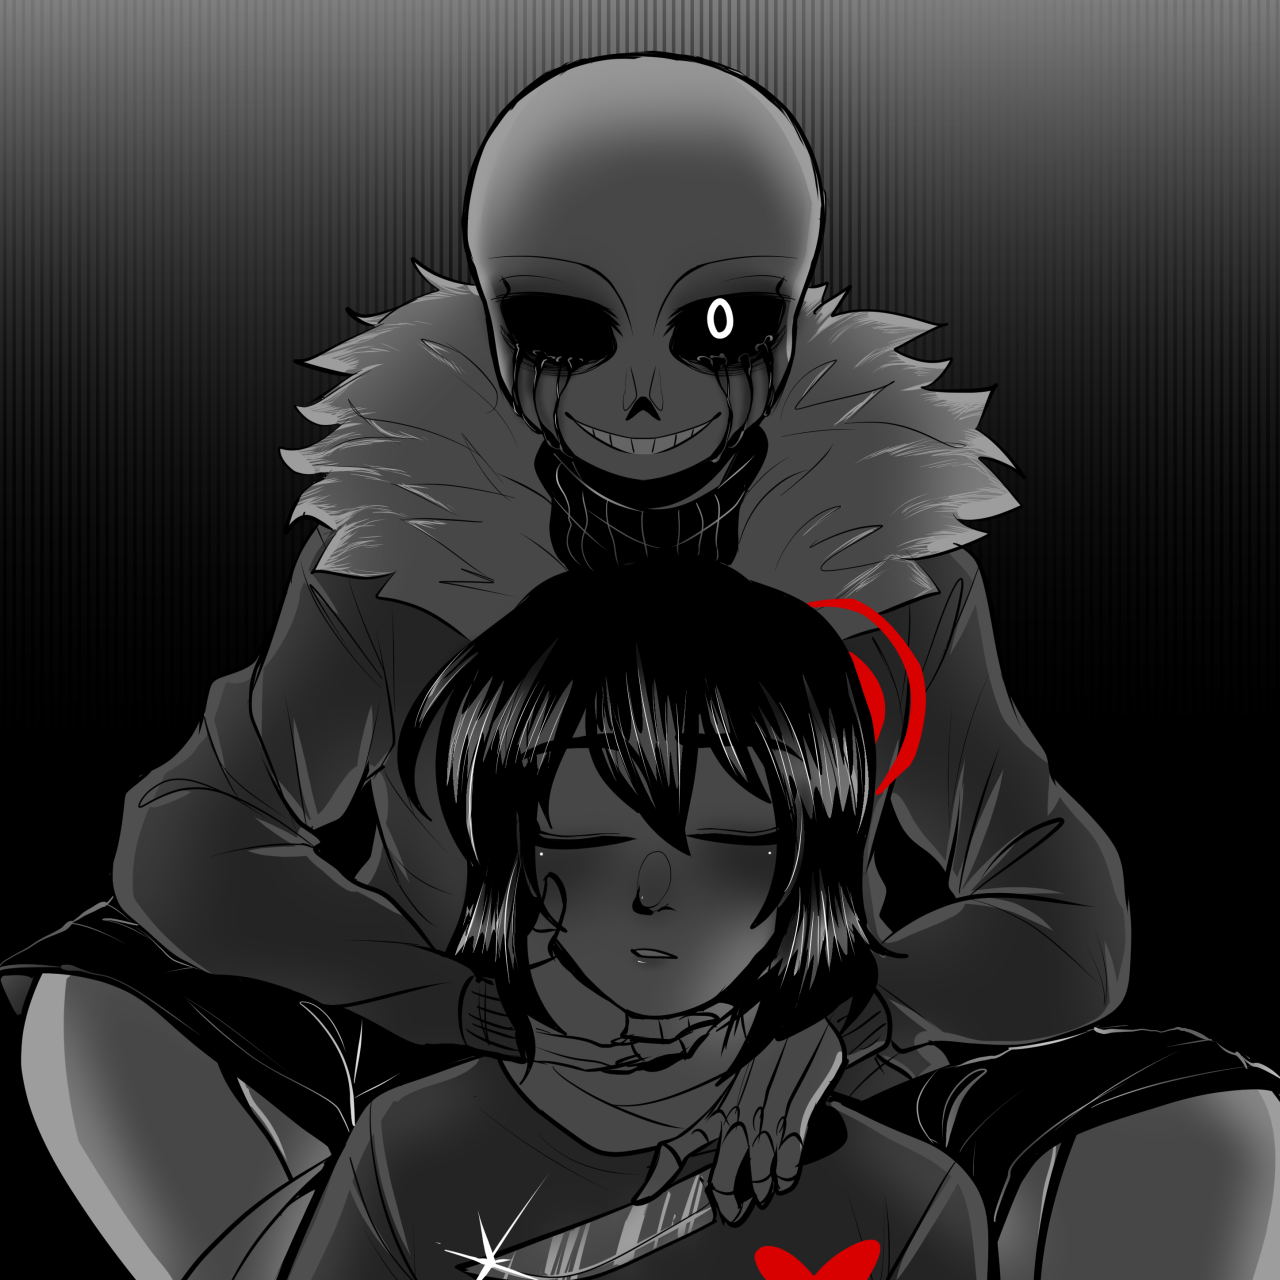 ☆ Sweetness × on X: ☆ Daughter of Killer!Sans and Fp! Frisk I did this  based on a question on tumblr ❤️ #Undertale好きさんと繋がりたい #undertaleAU # killersans #daughter  / X